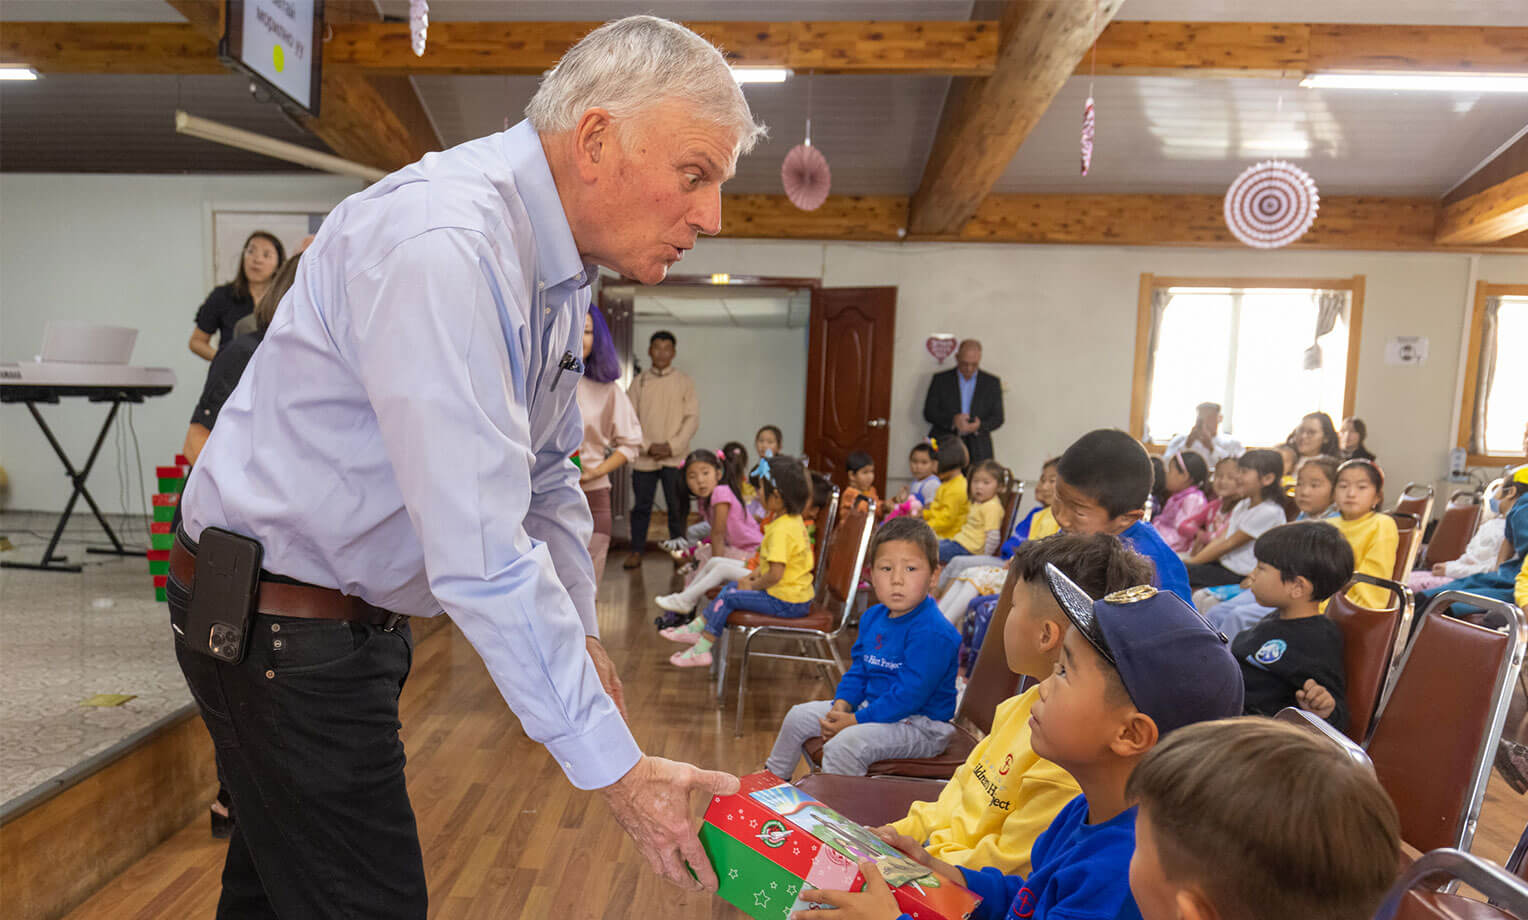 Franklin Graham gives boys and girls Operation Christmas Child shoebox gifts in Mongolia.